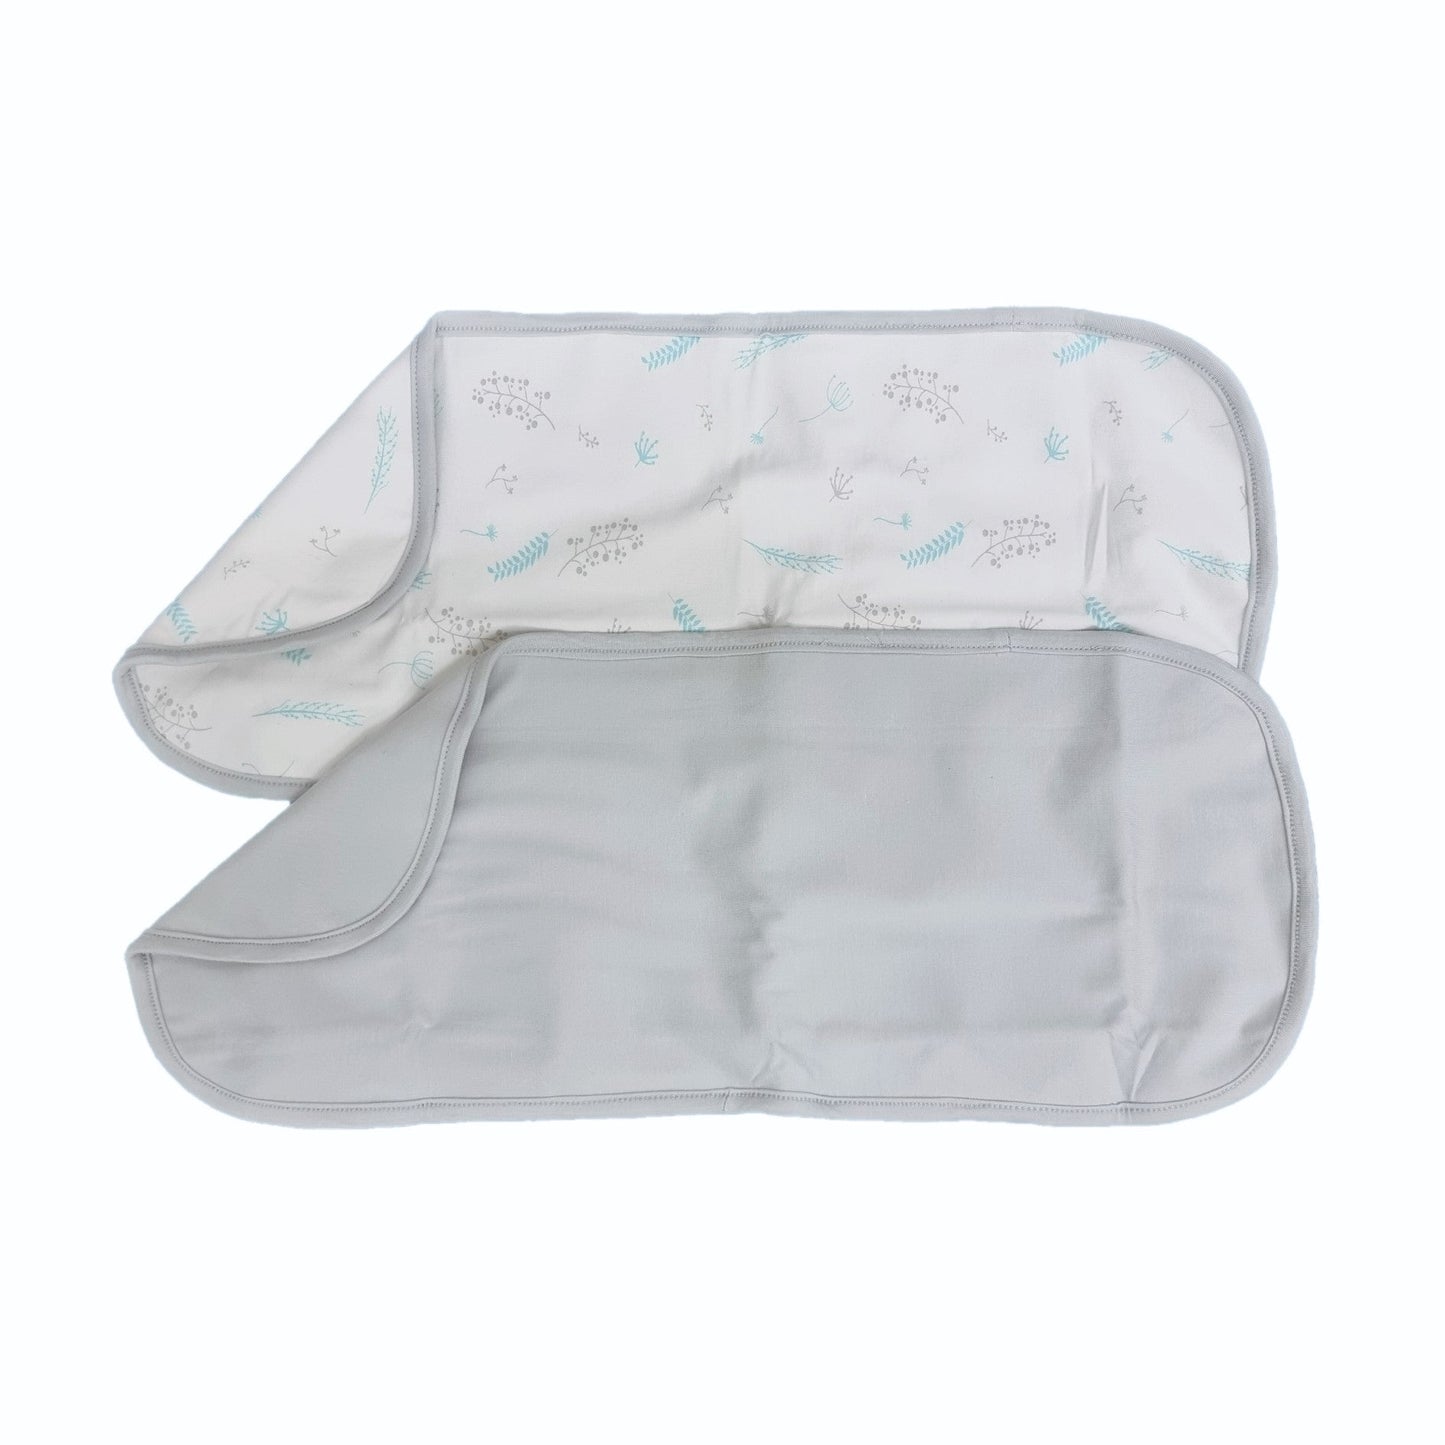 Breeze - Baby Bamboo Burp Cloths (Pack of 2)